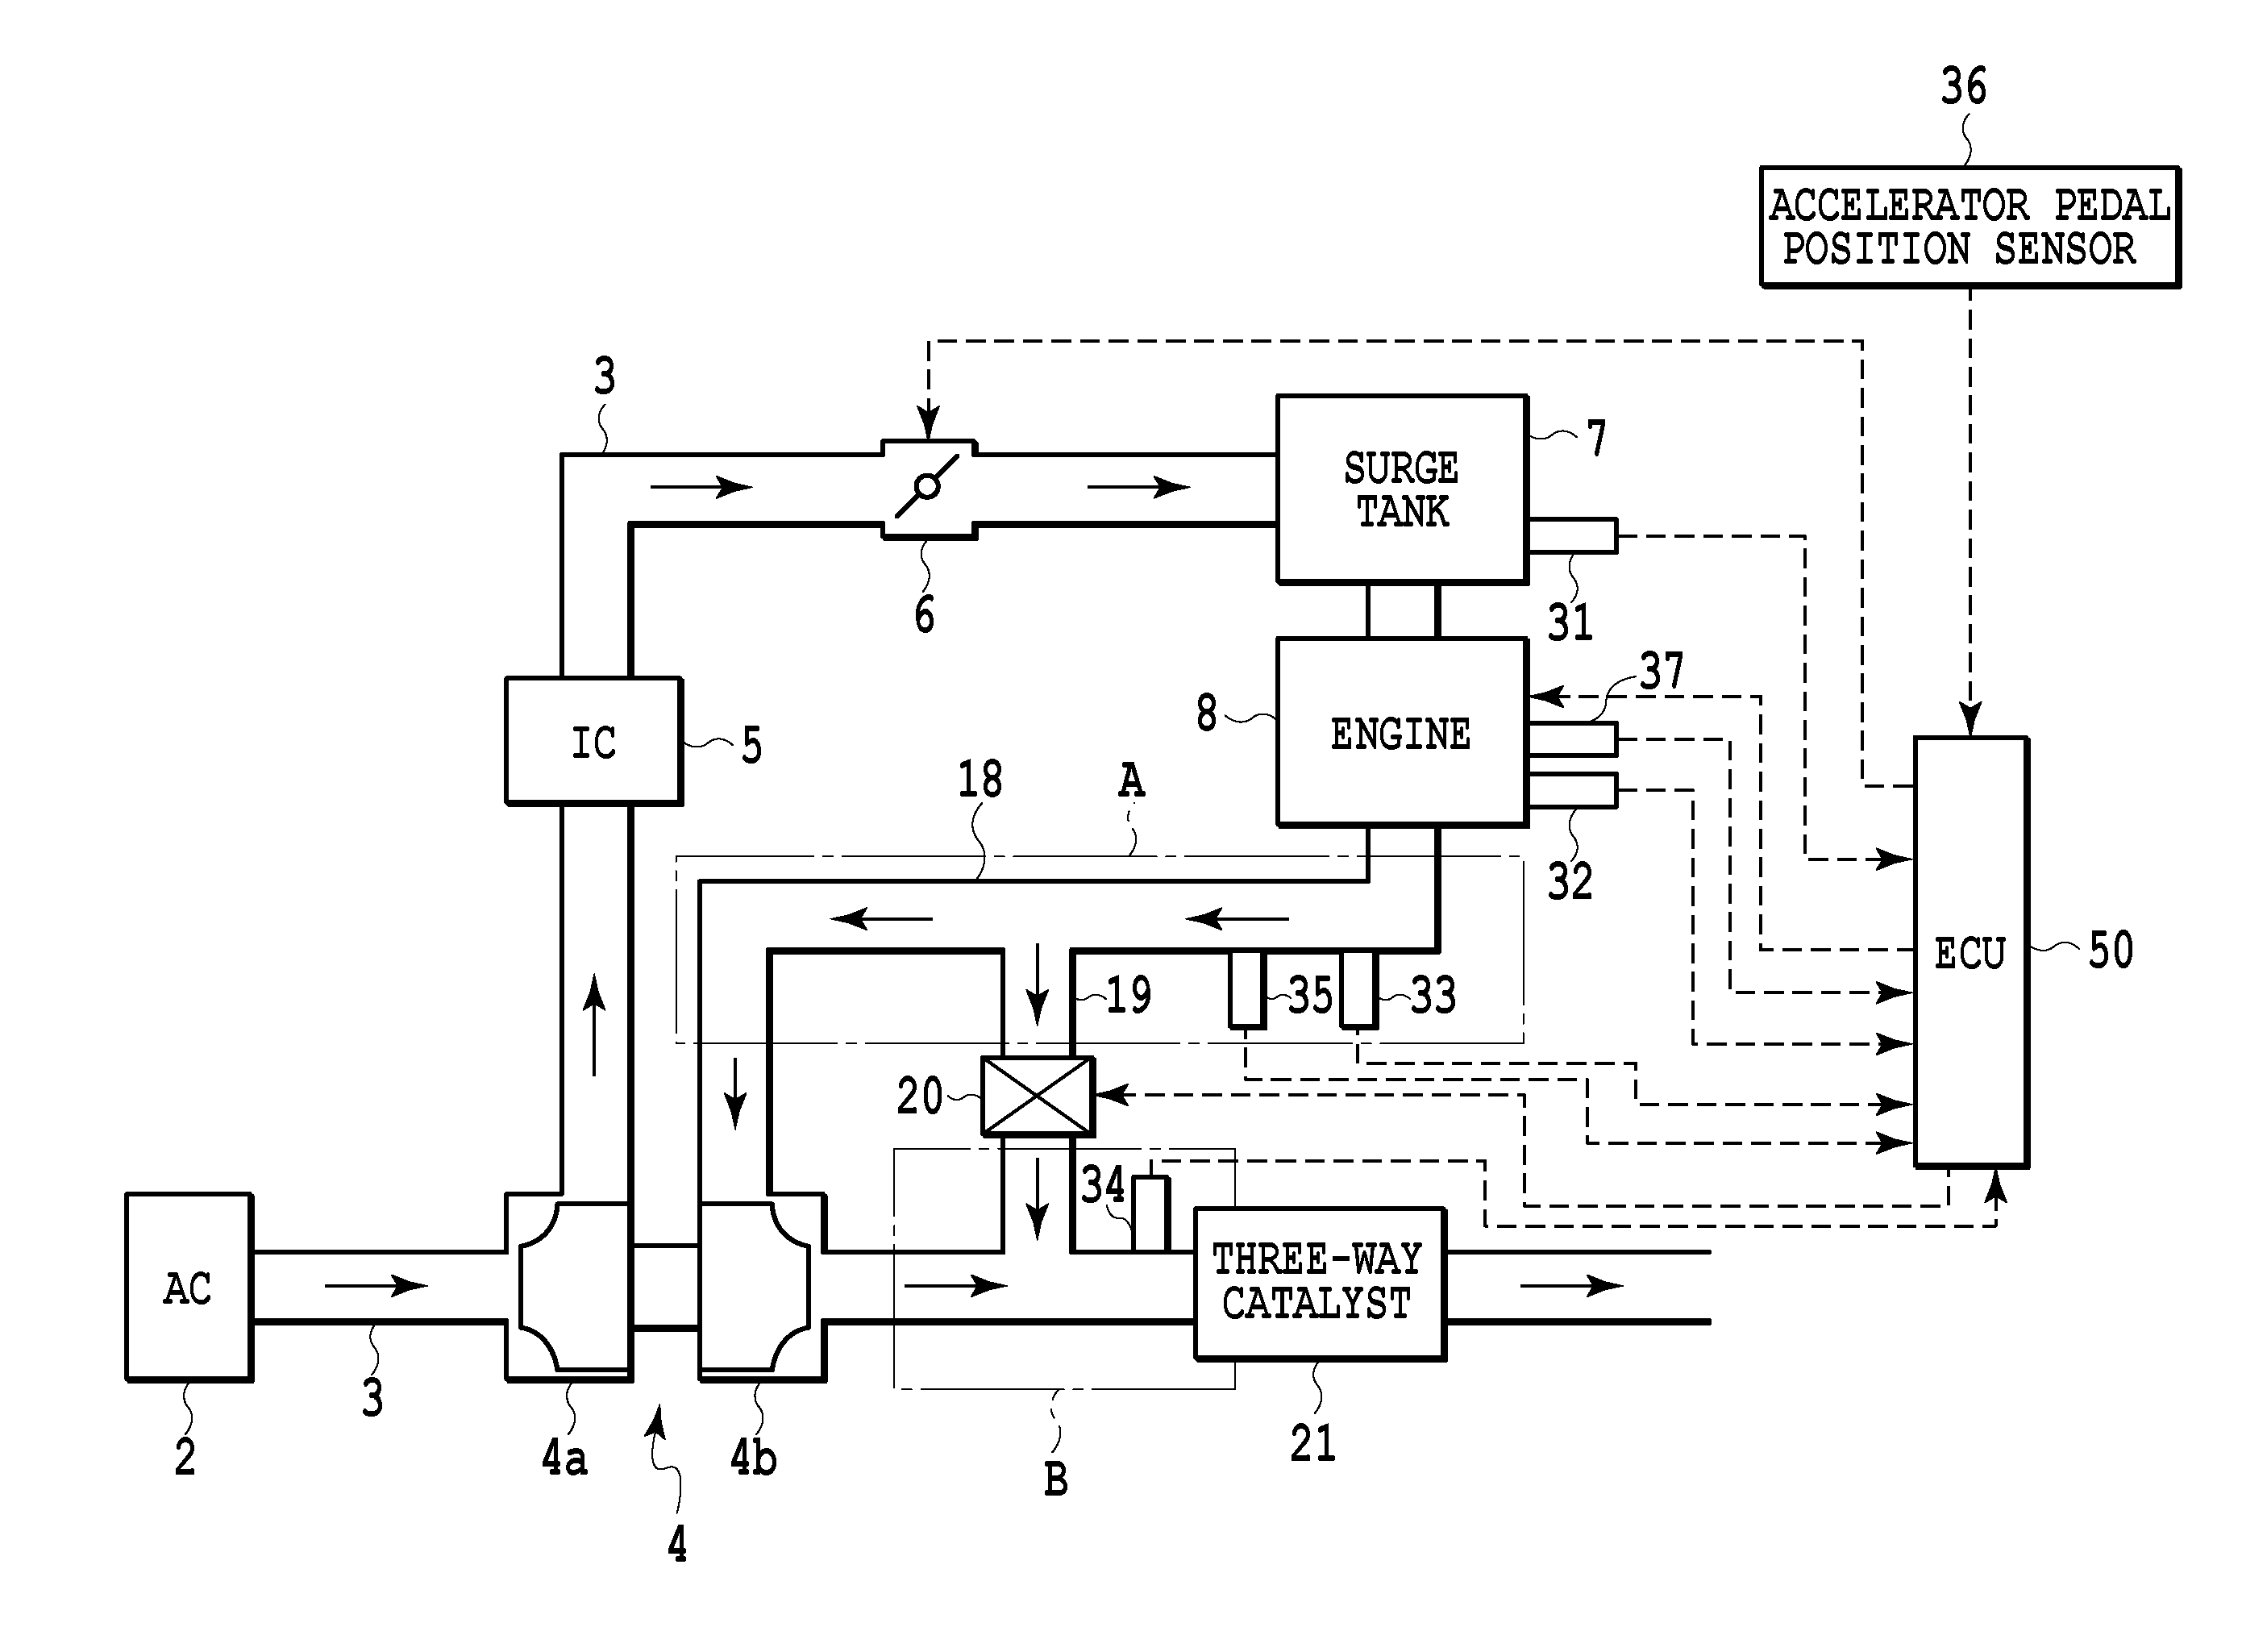 Apparatus for controlling an internal combustion engine